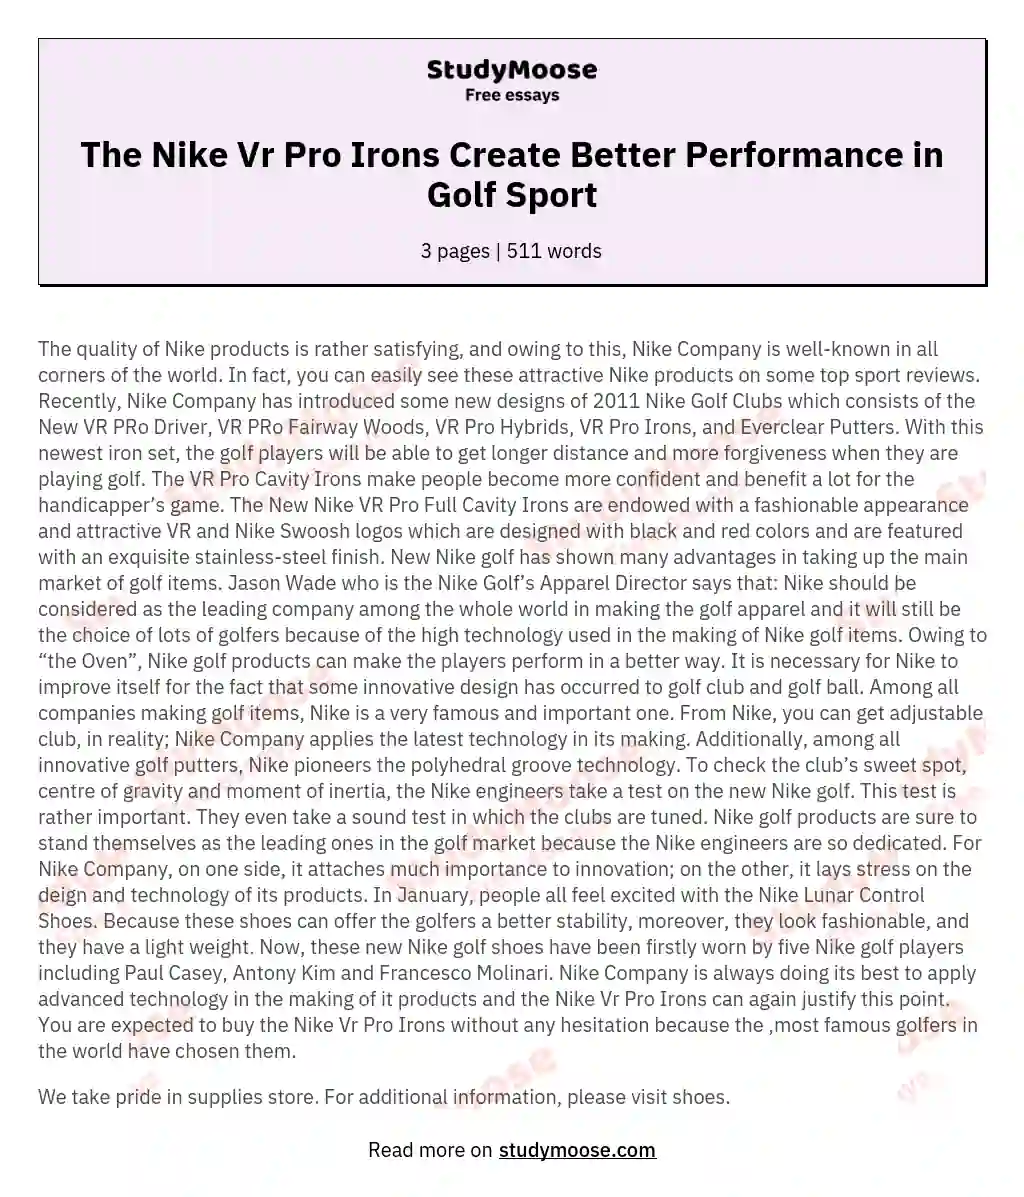 The Nike Vr Pro Irons Create Better Performance in Golf Sport essay